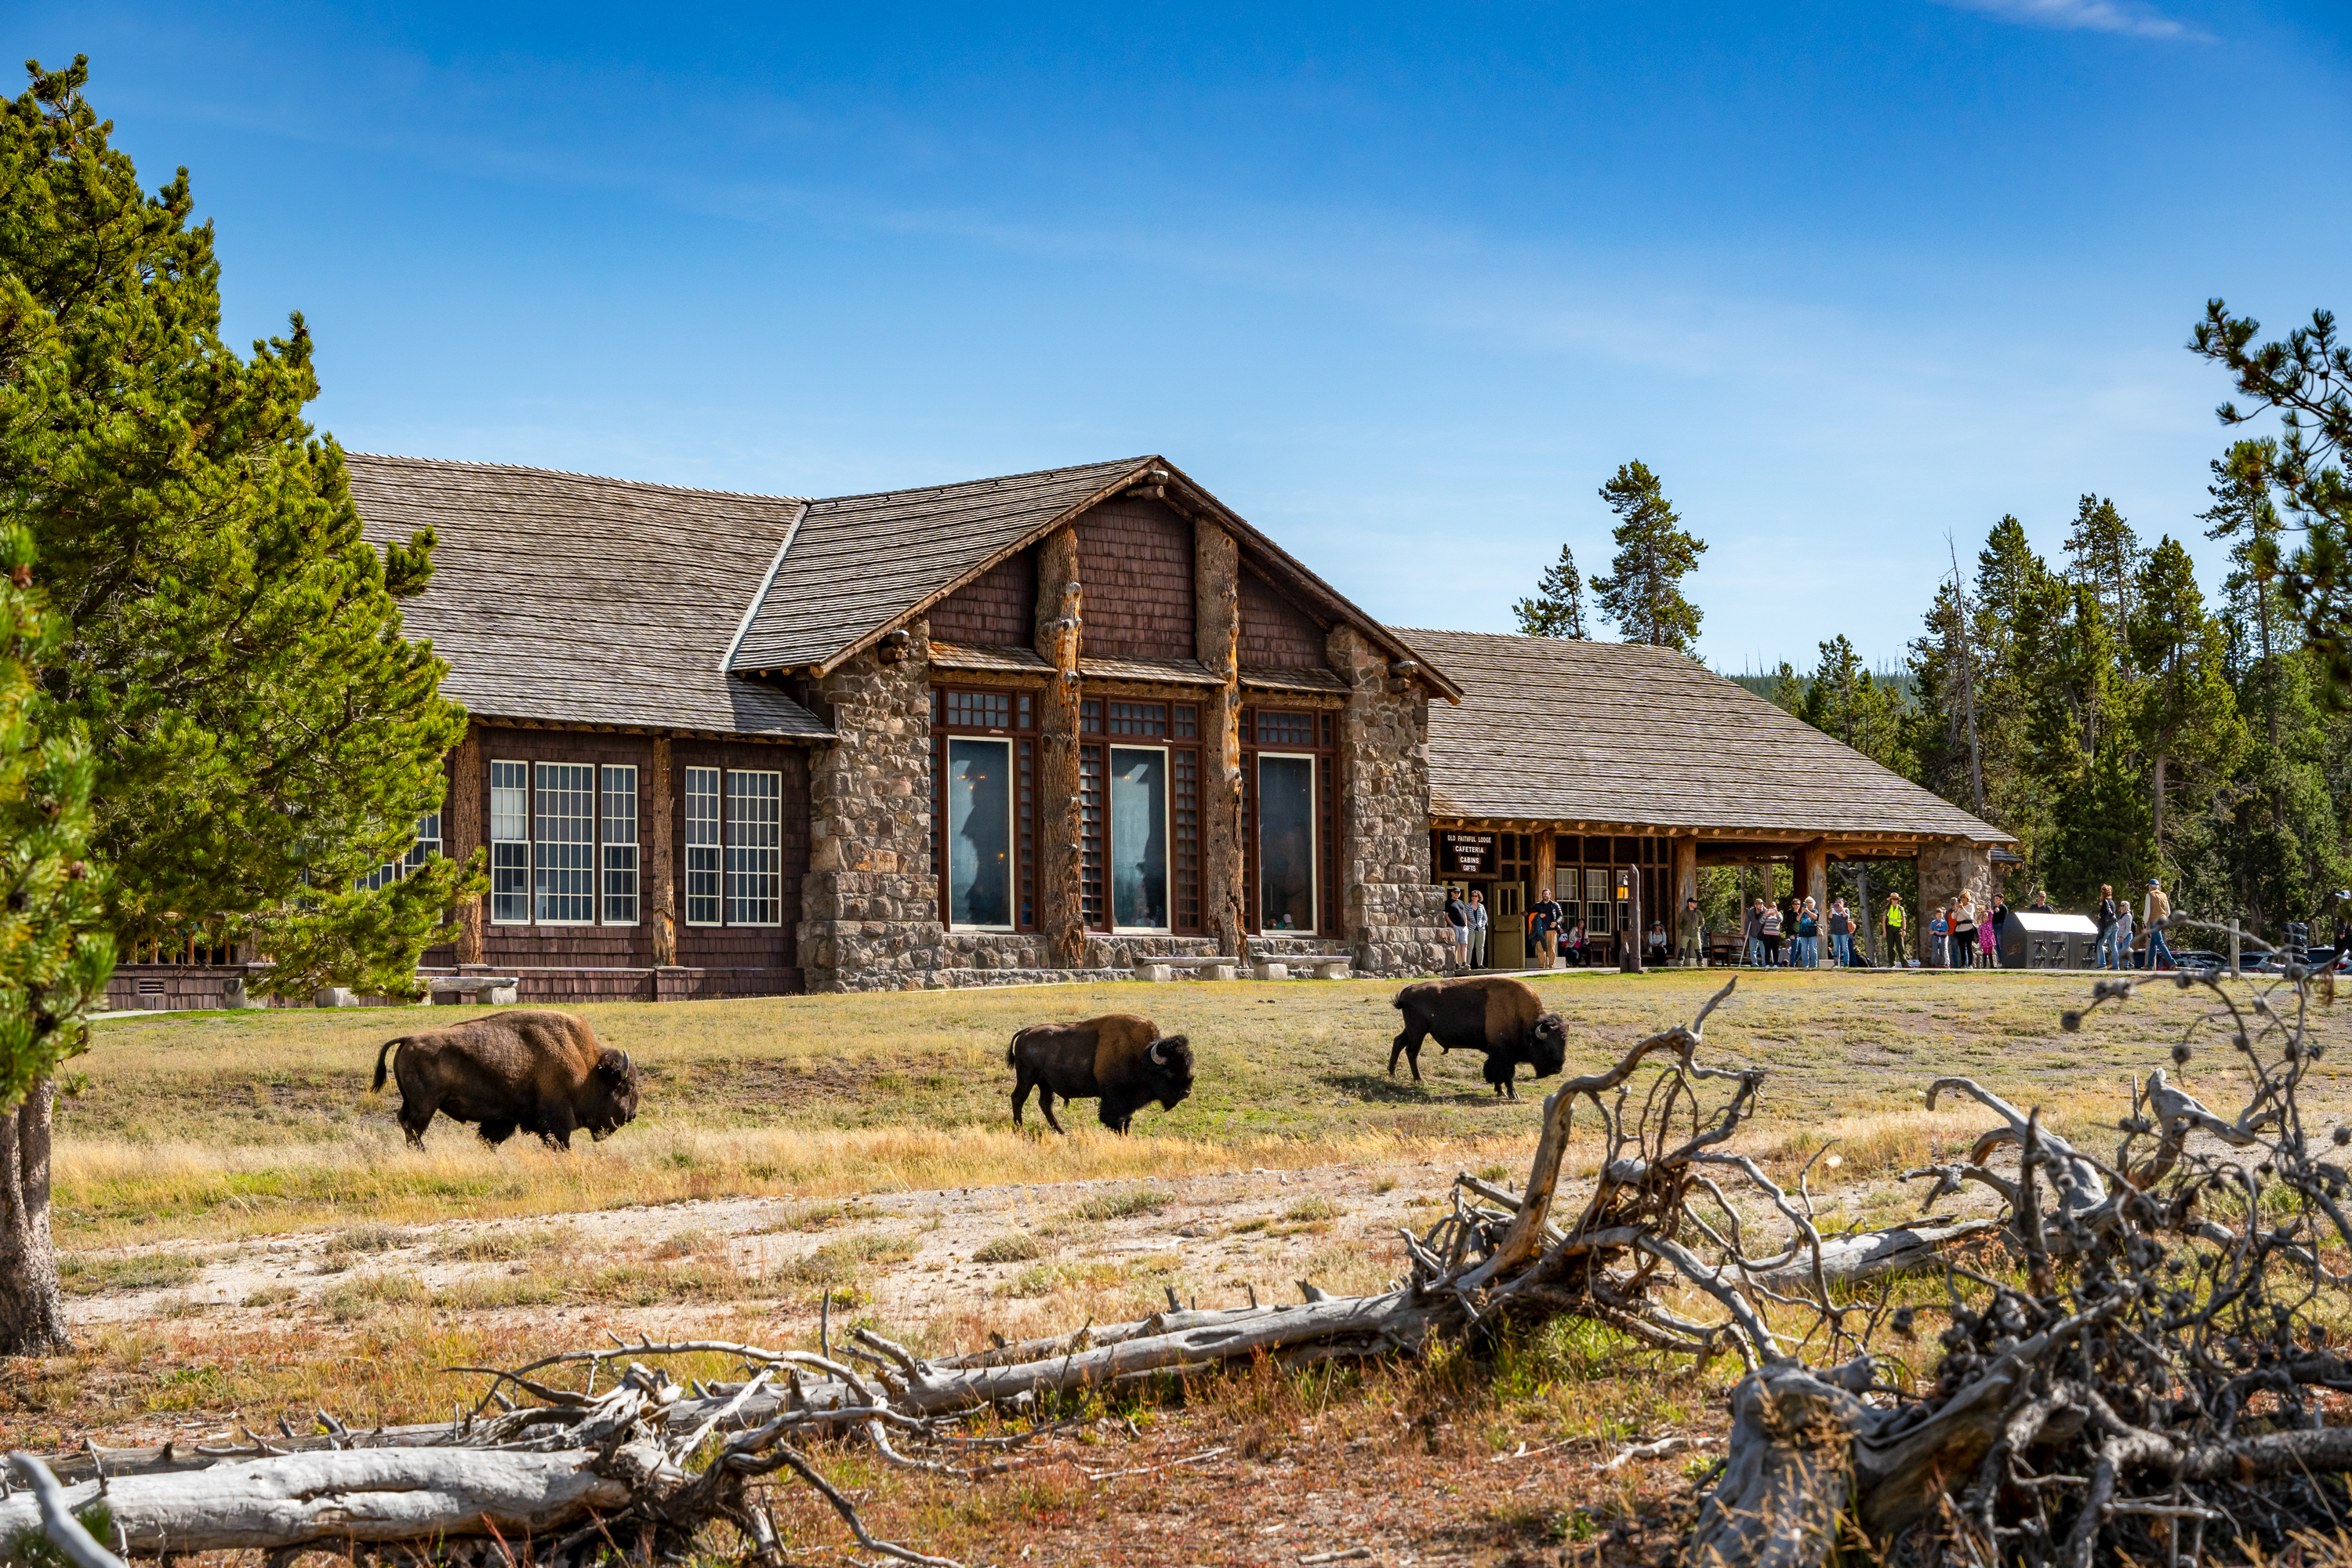 How to Find the Best Rates in Yellowstone